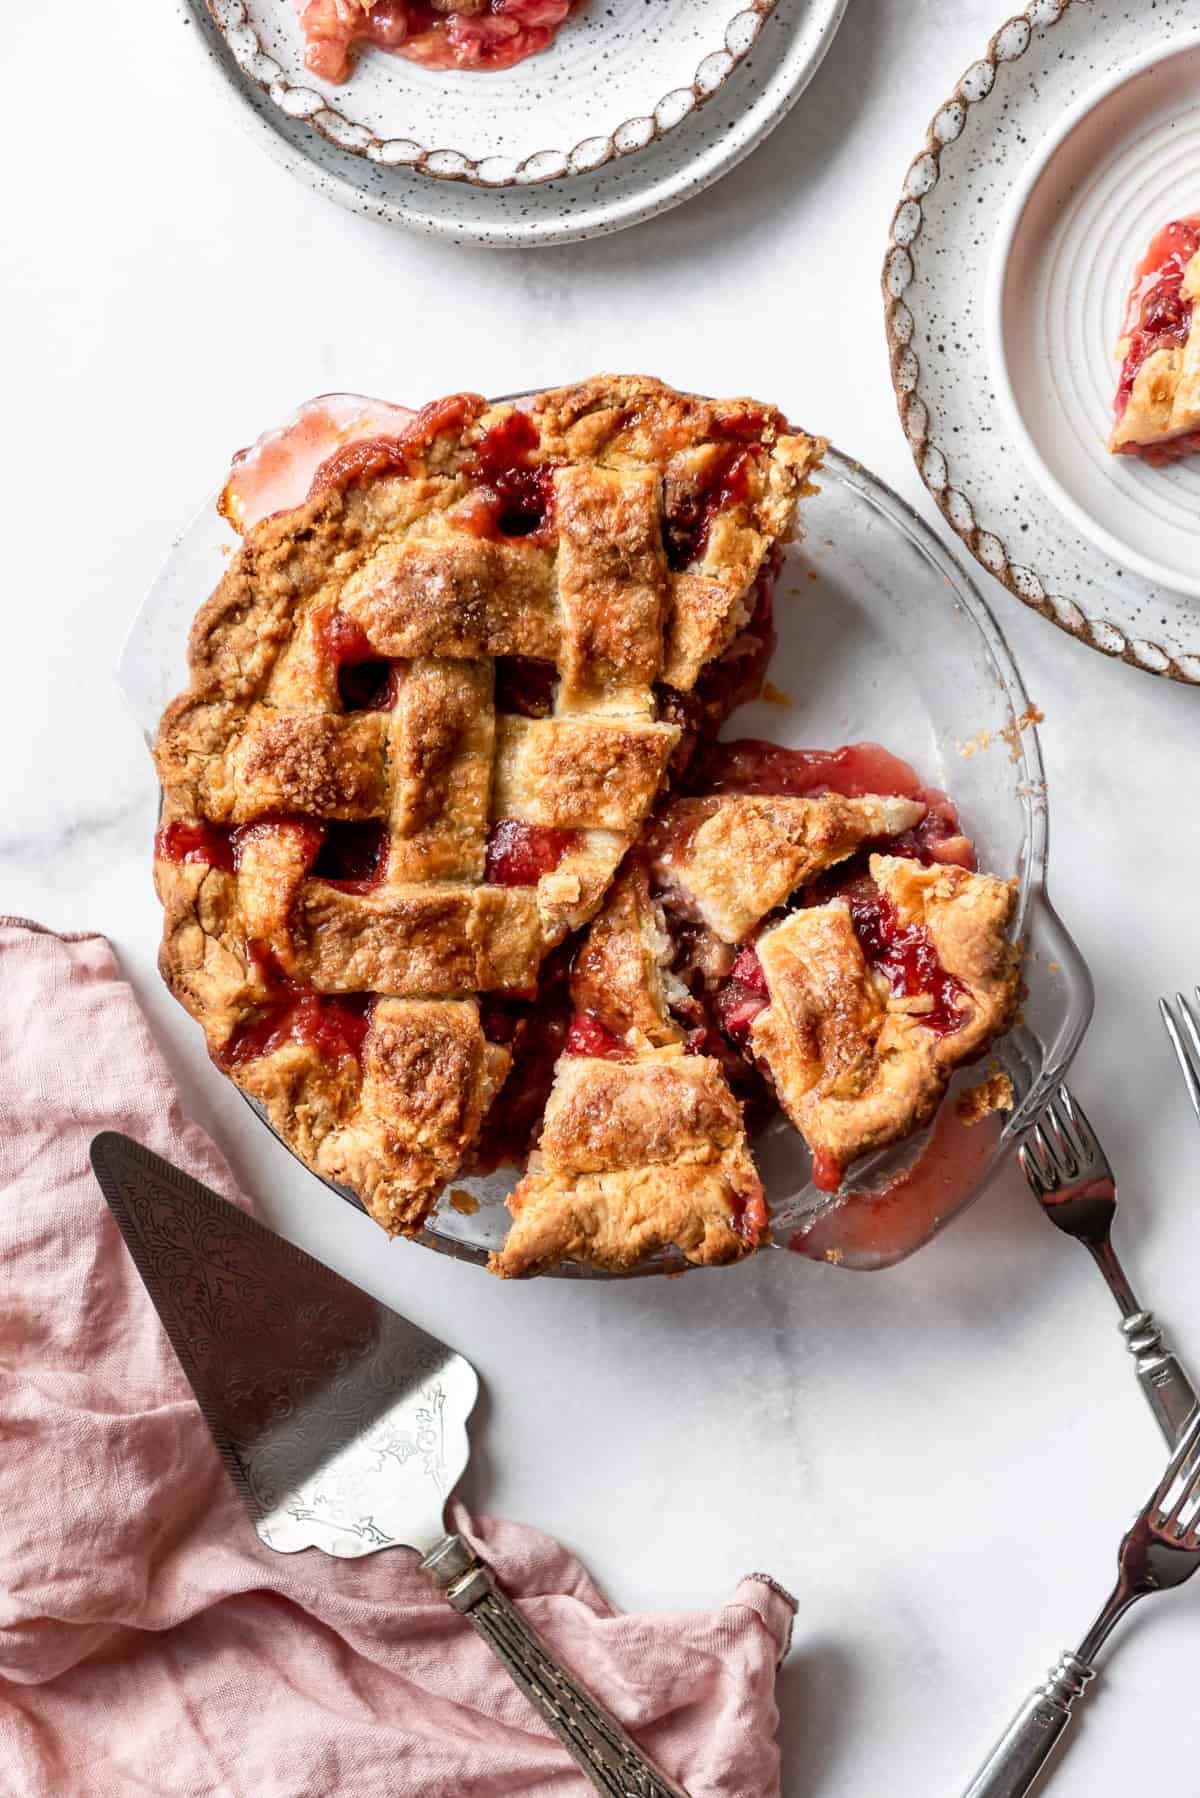 A strawberry rhubarb pie with slices removed and set on nearby plates.